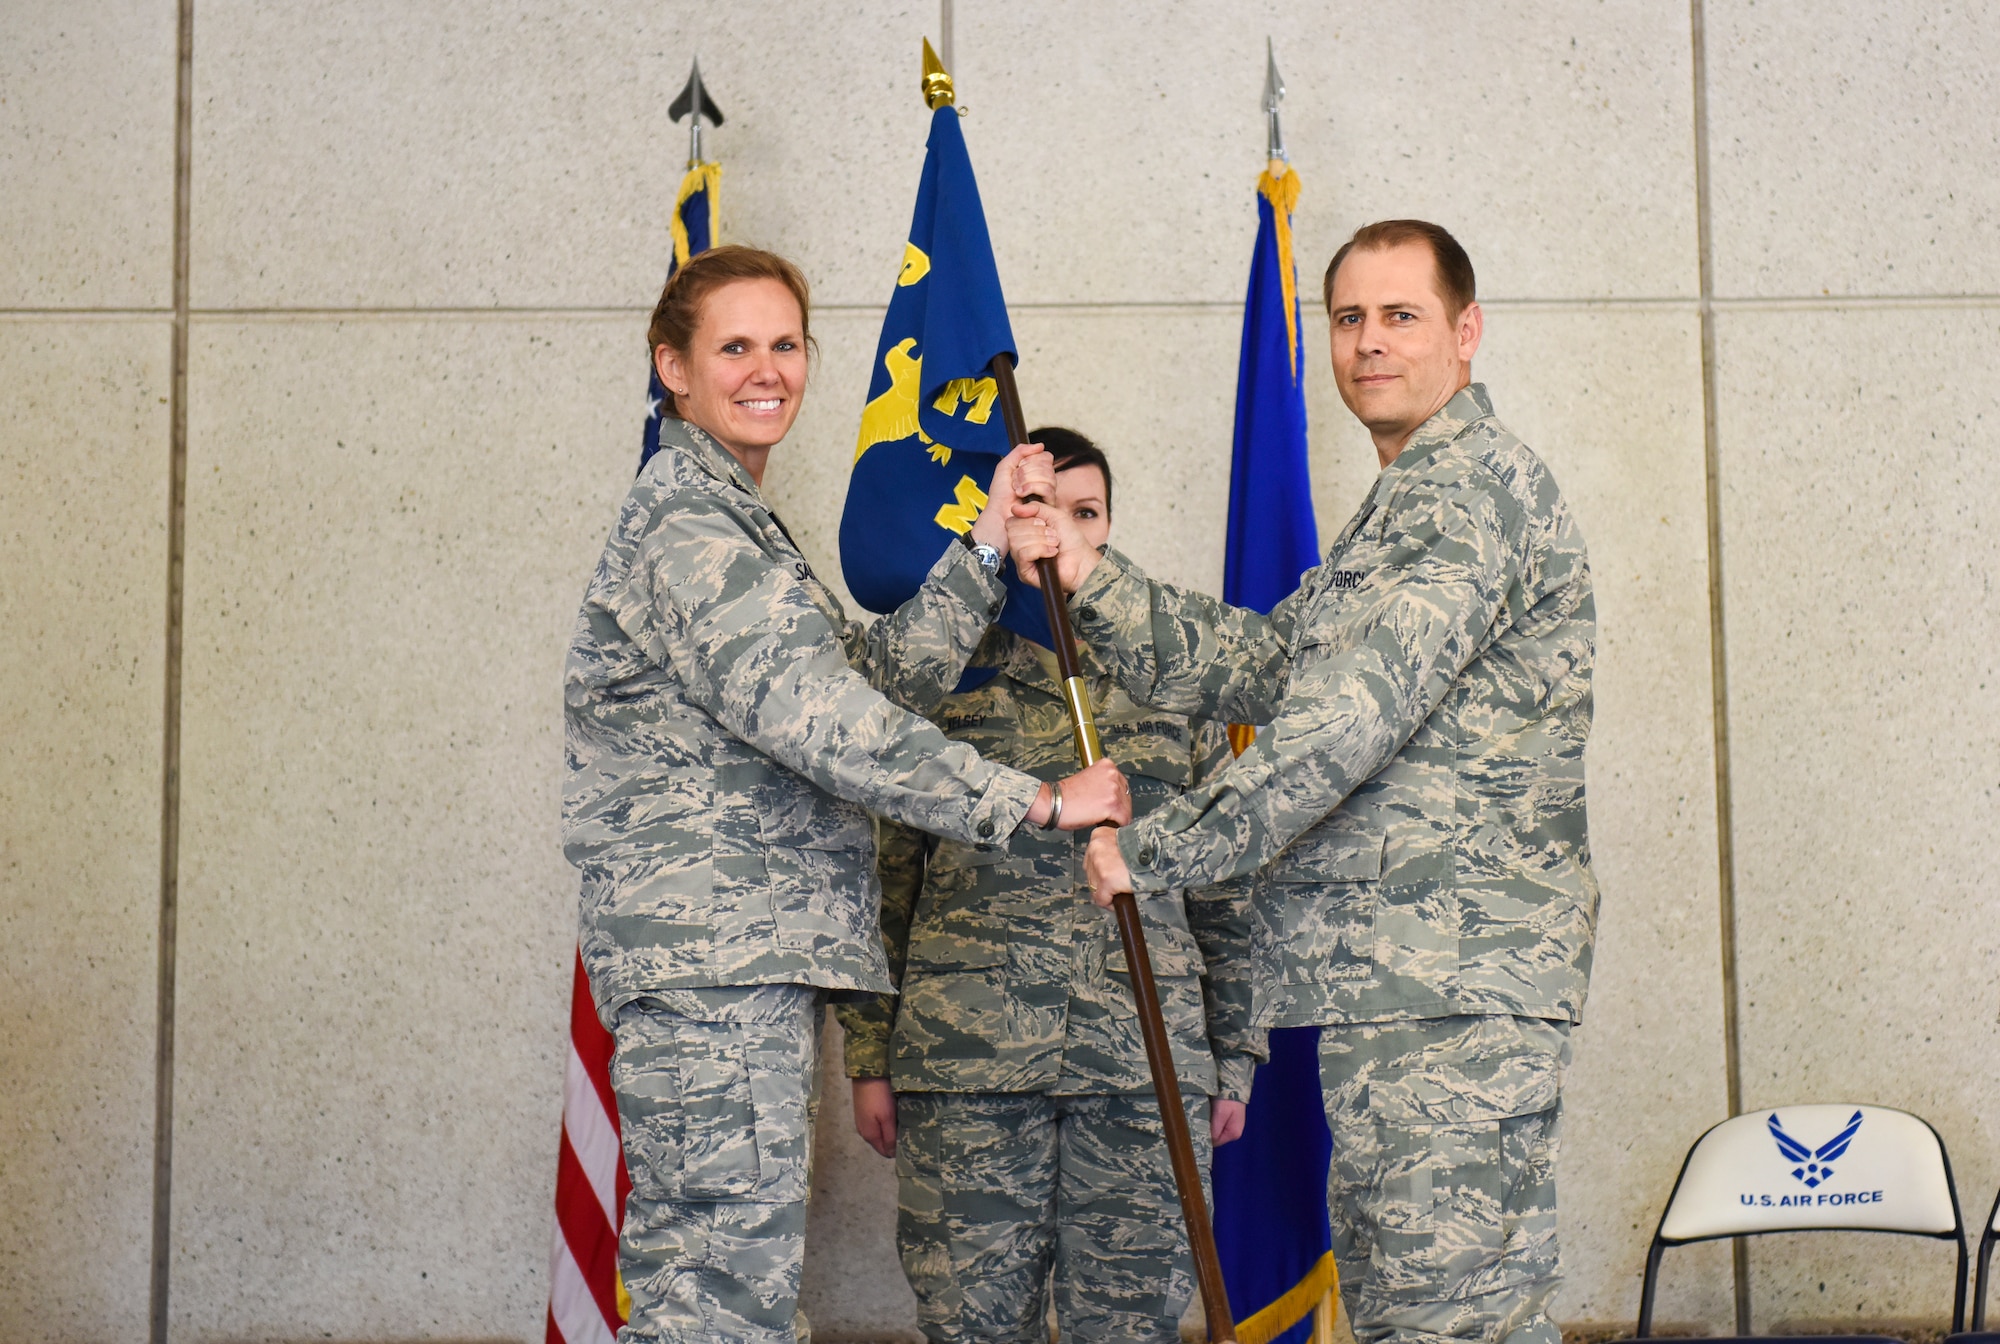 Lt. Col. David Jackson, the new 419th Medical Squadron commander, accepts the squadron flag from Col. Regina Sabric, 419th Fighter Wing commander, during a change of command ceremony